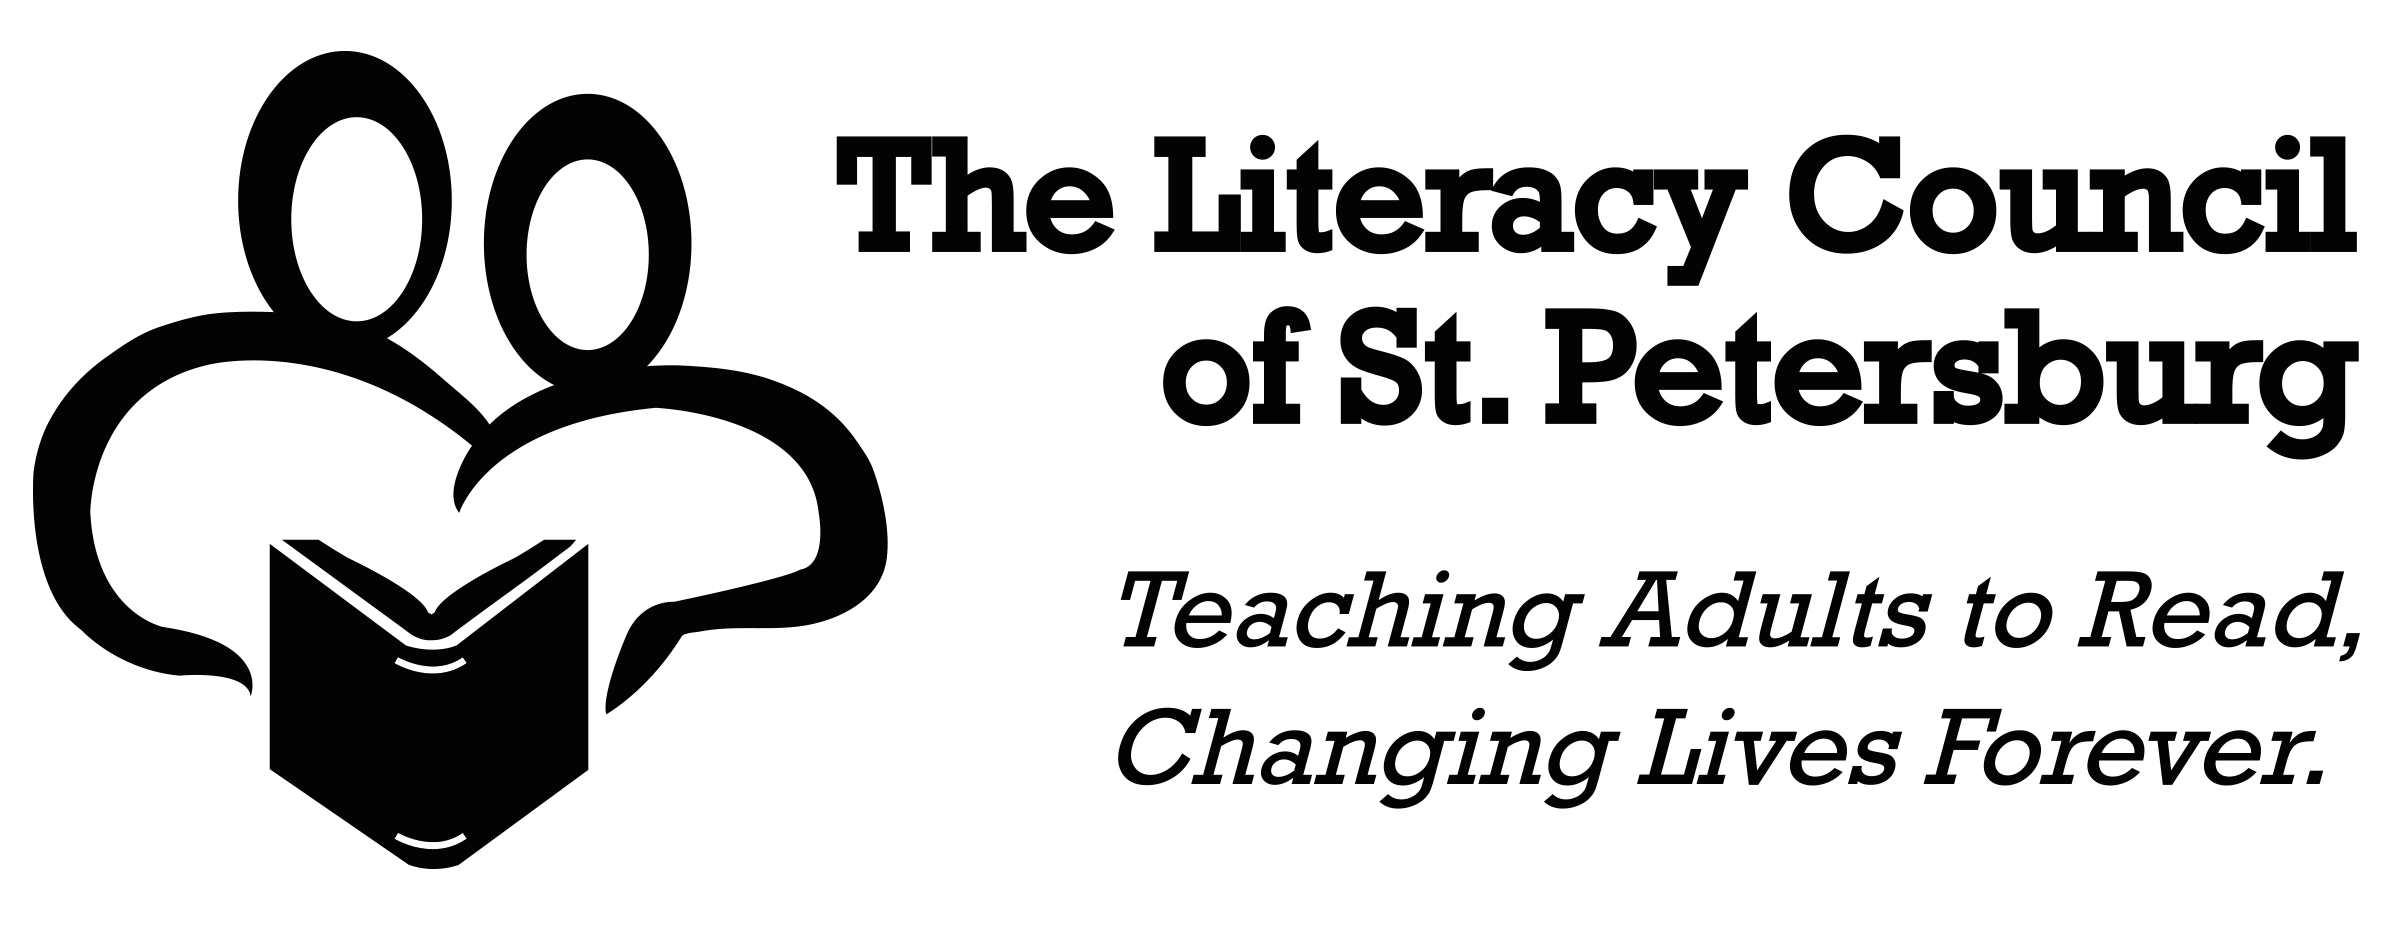 Literacy Council of St Petersburg logo